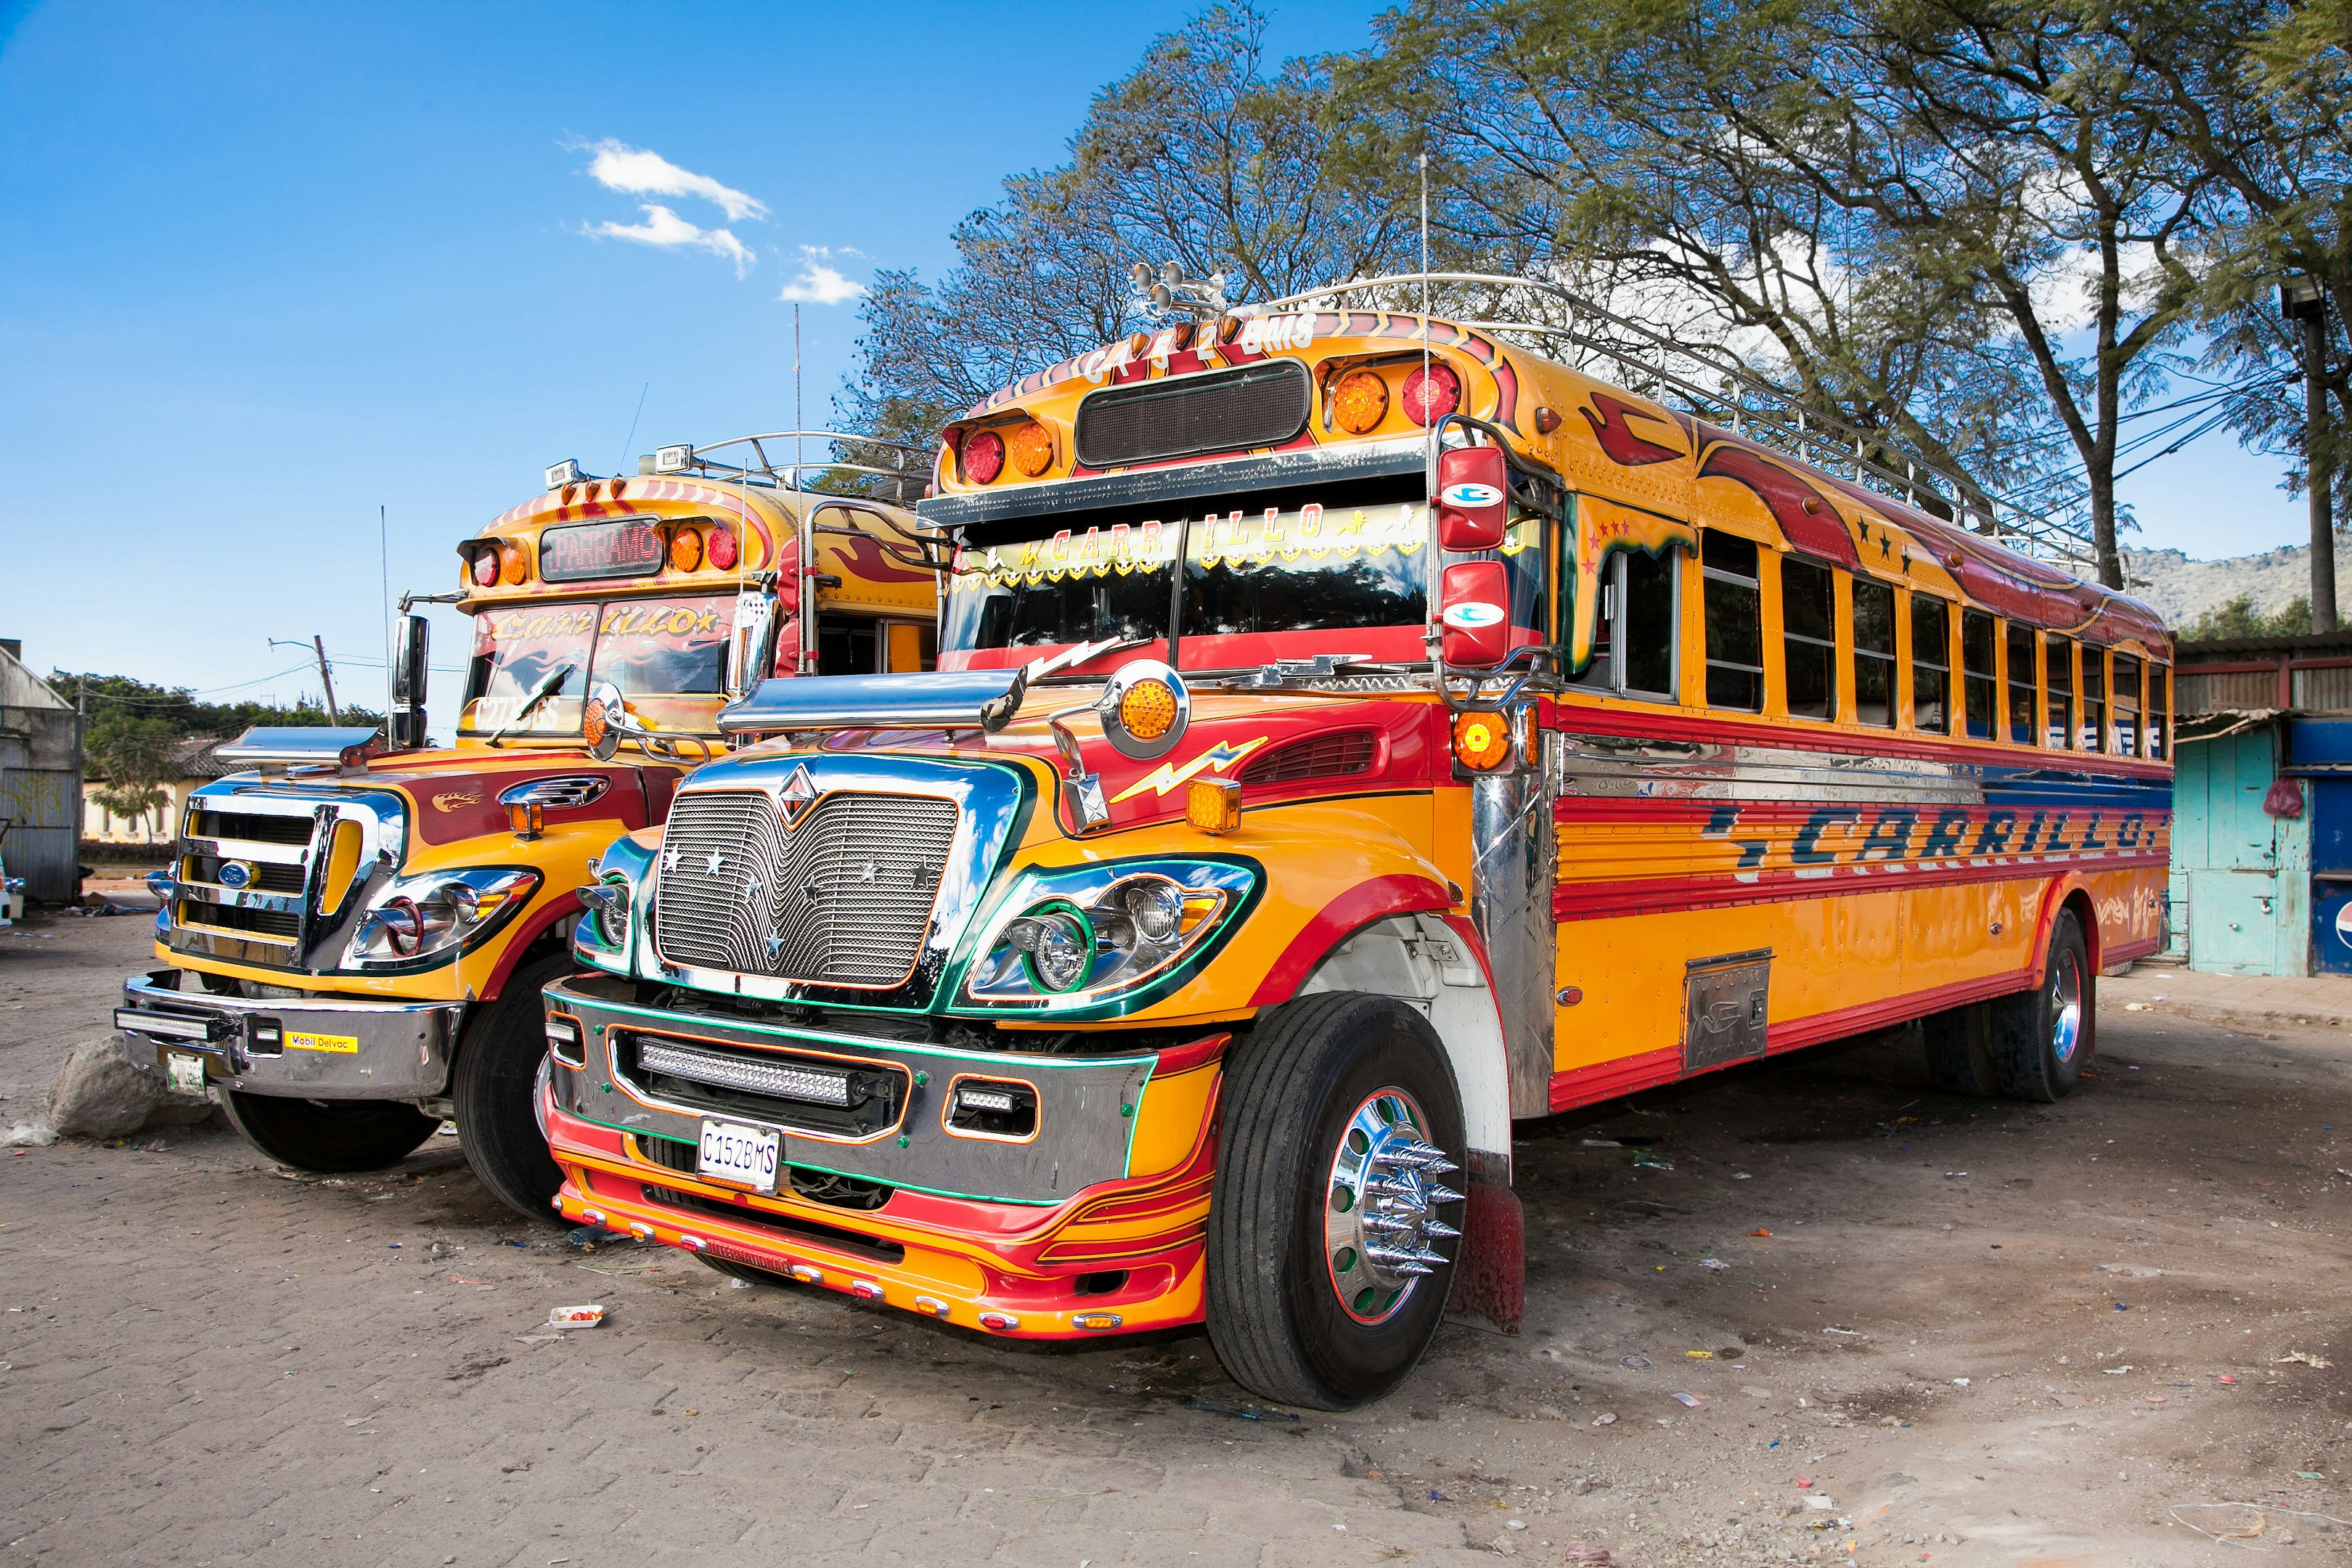 A pair of school buses painted with bright colors and chrome details sit parked on a road